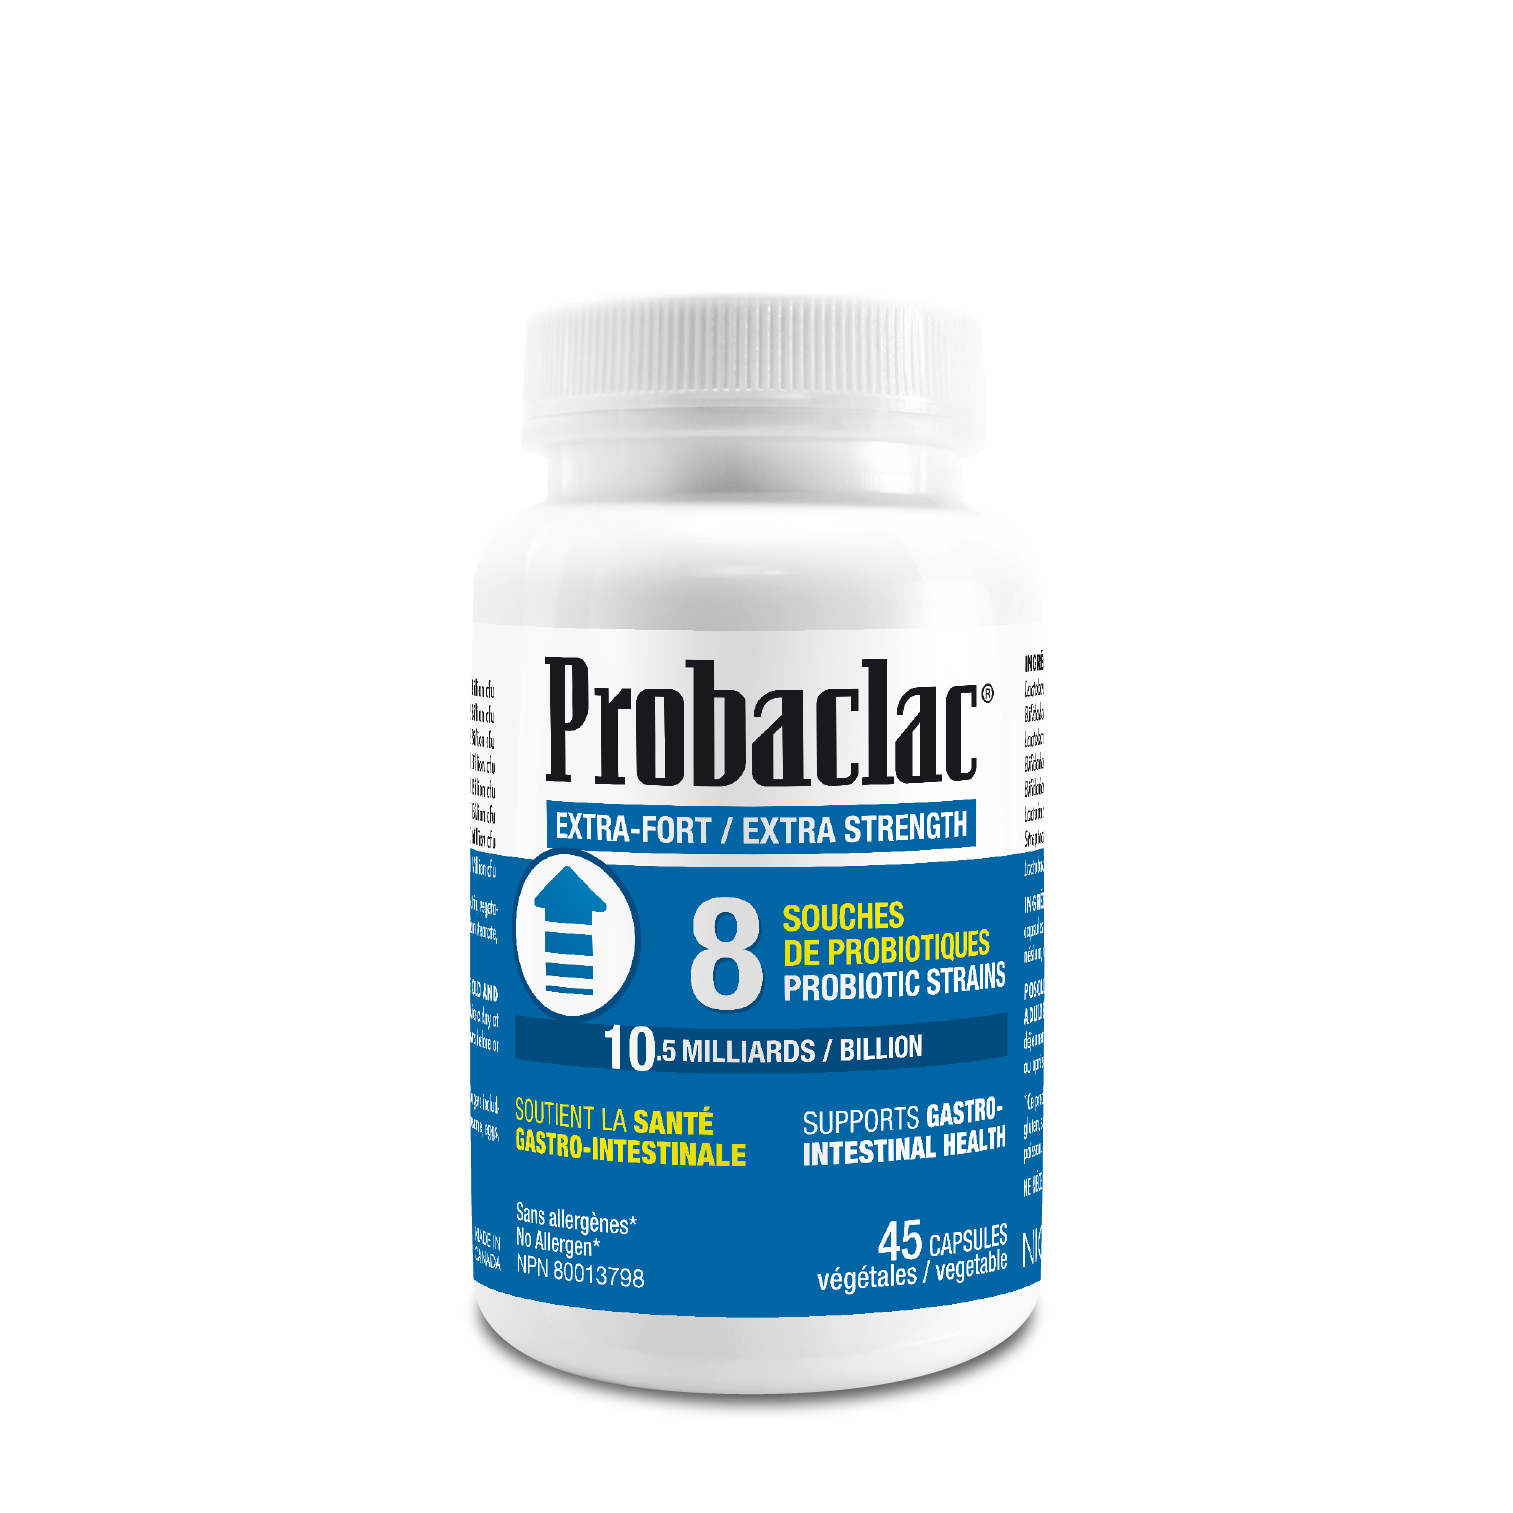 Probaclac Extra-Fort